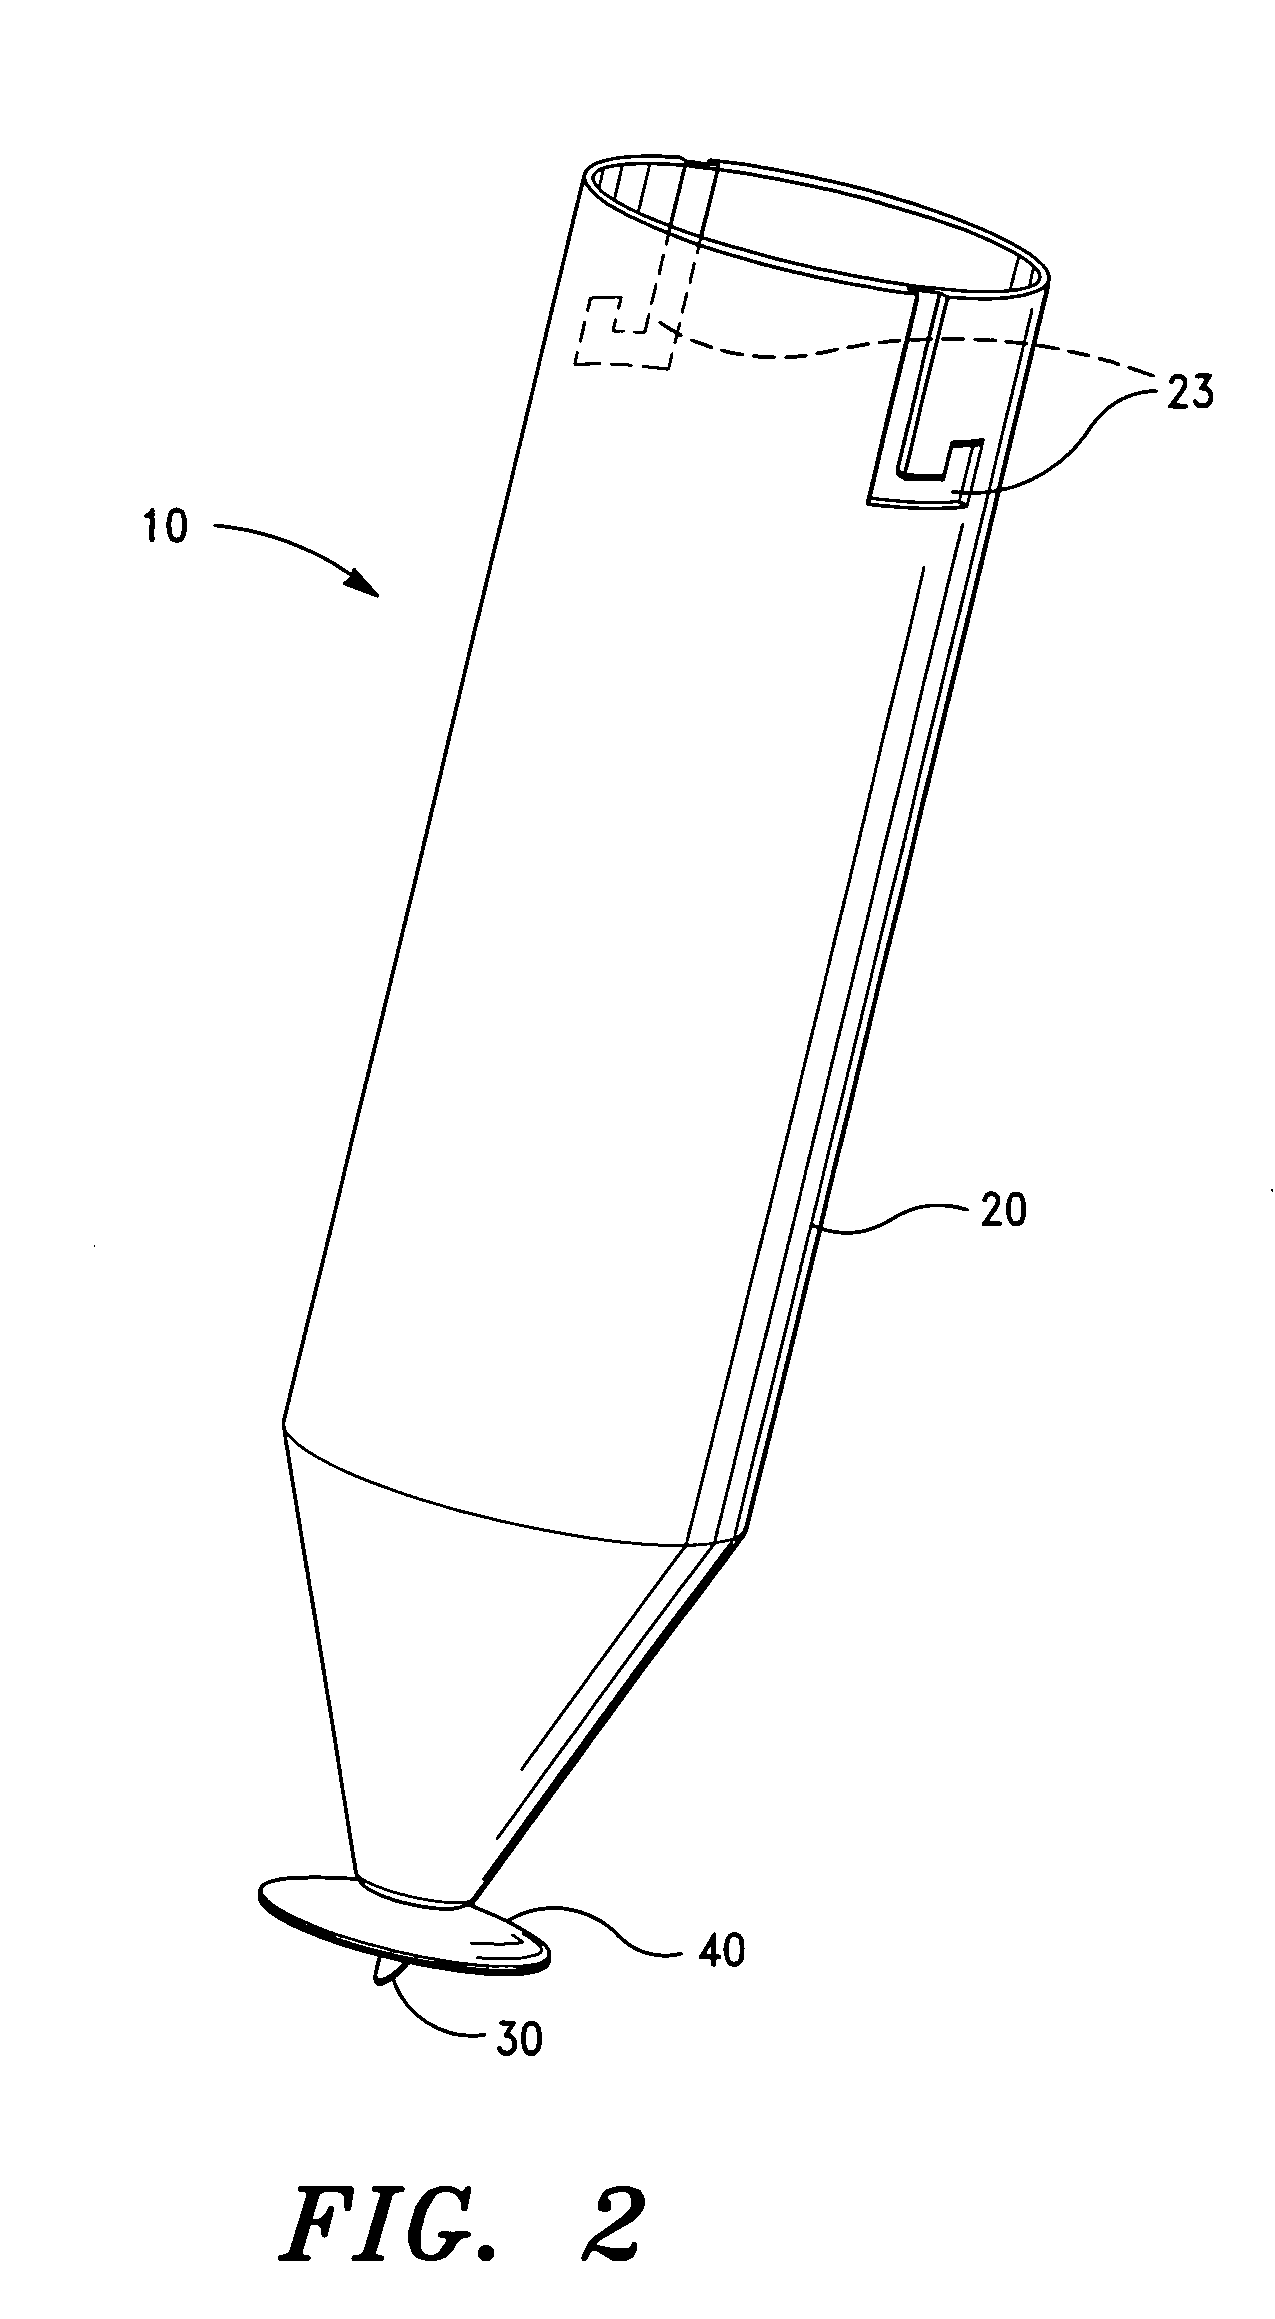 Intravitreal injection device, system and method